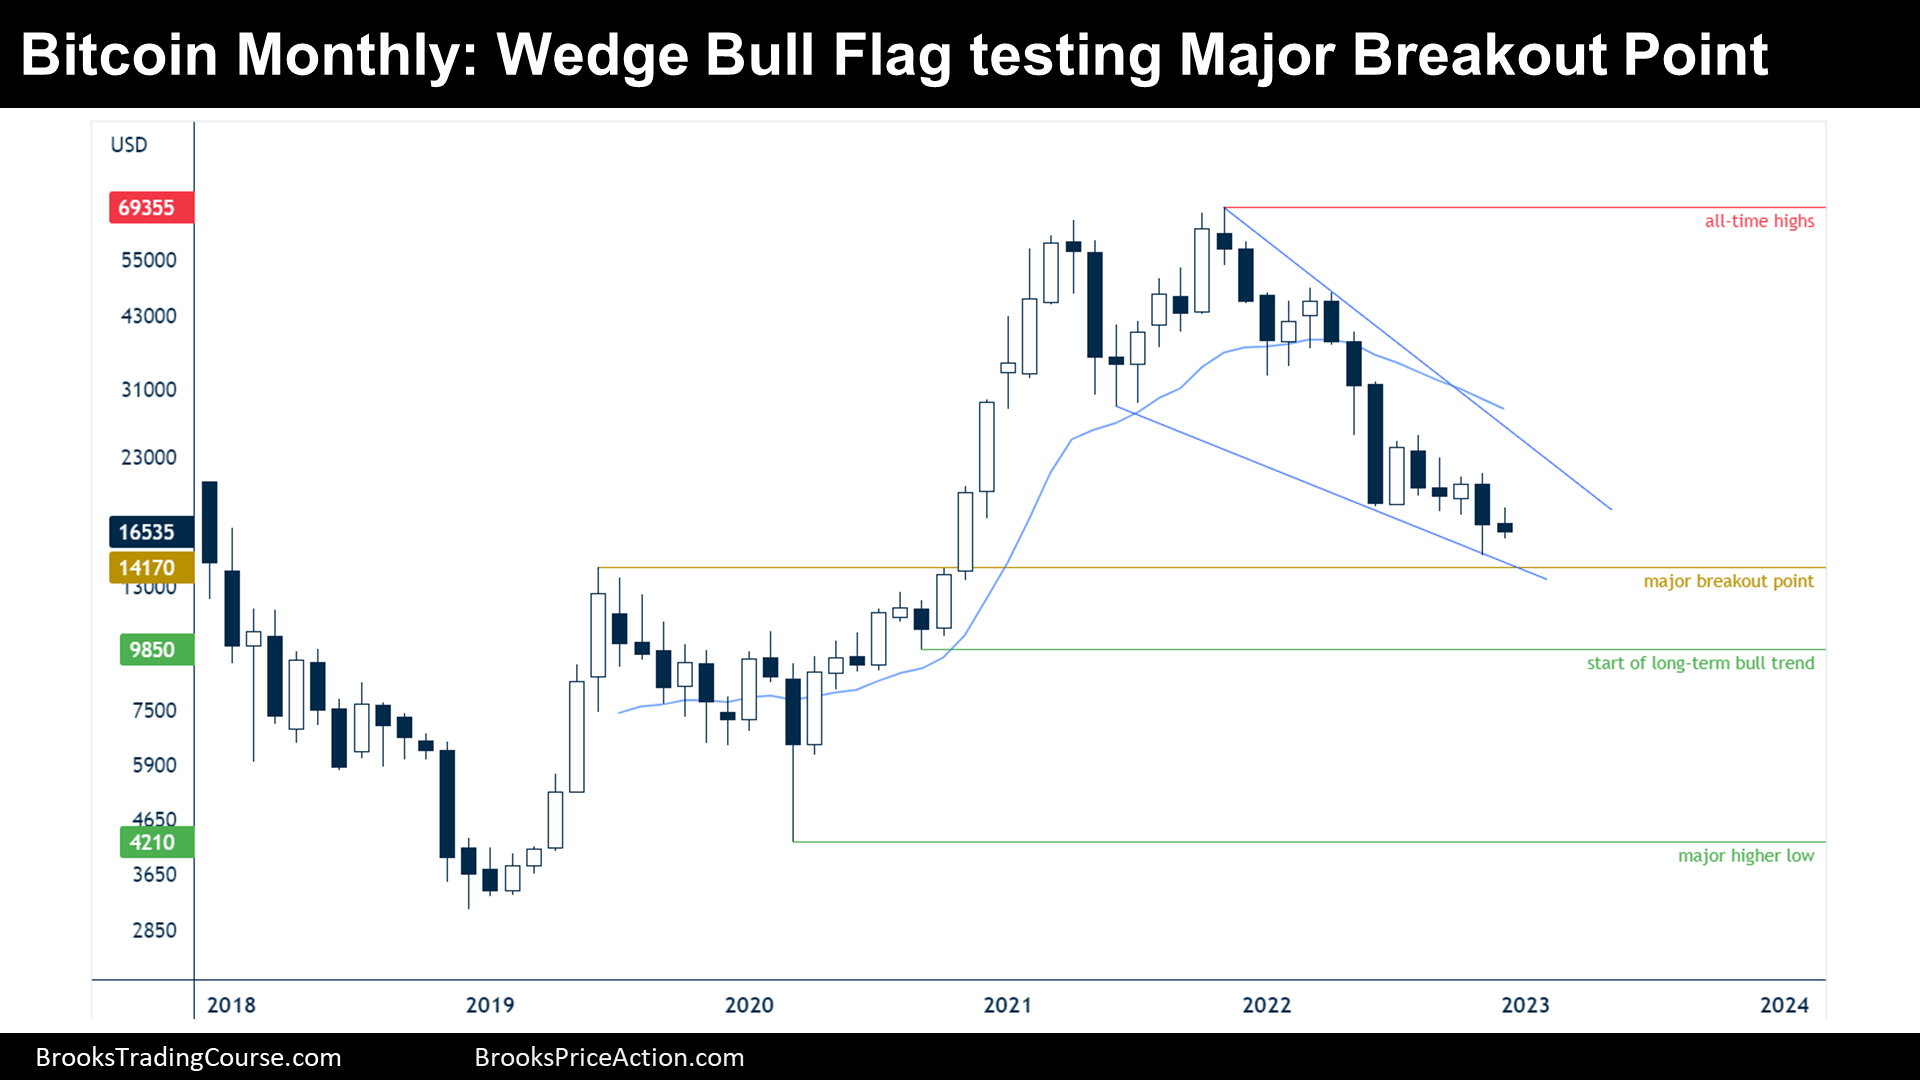 Bitcoin wedge bull flag monthly chart